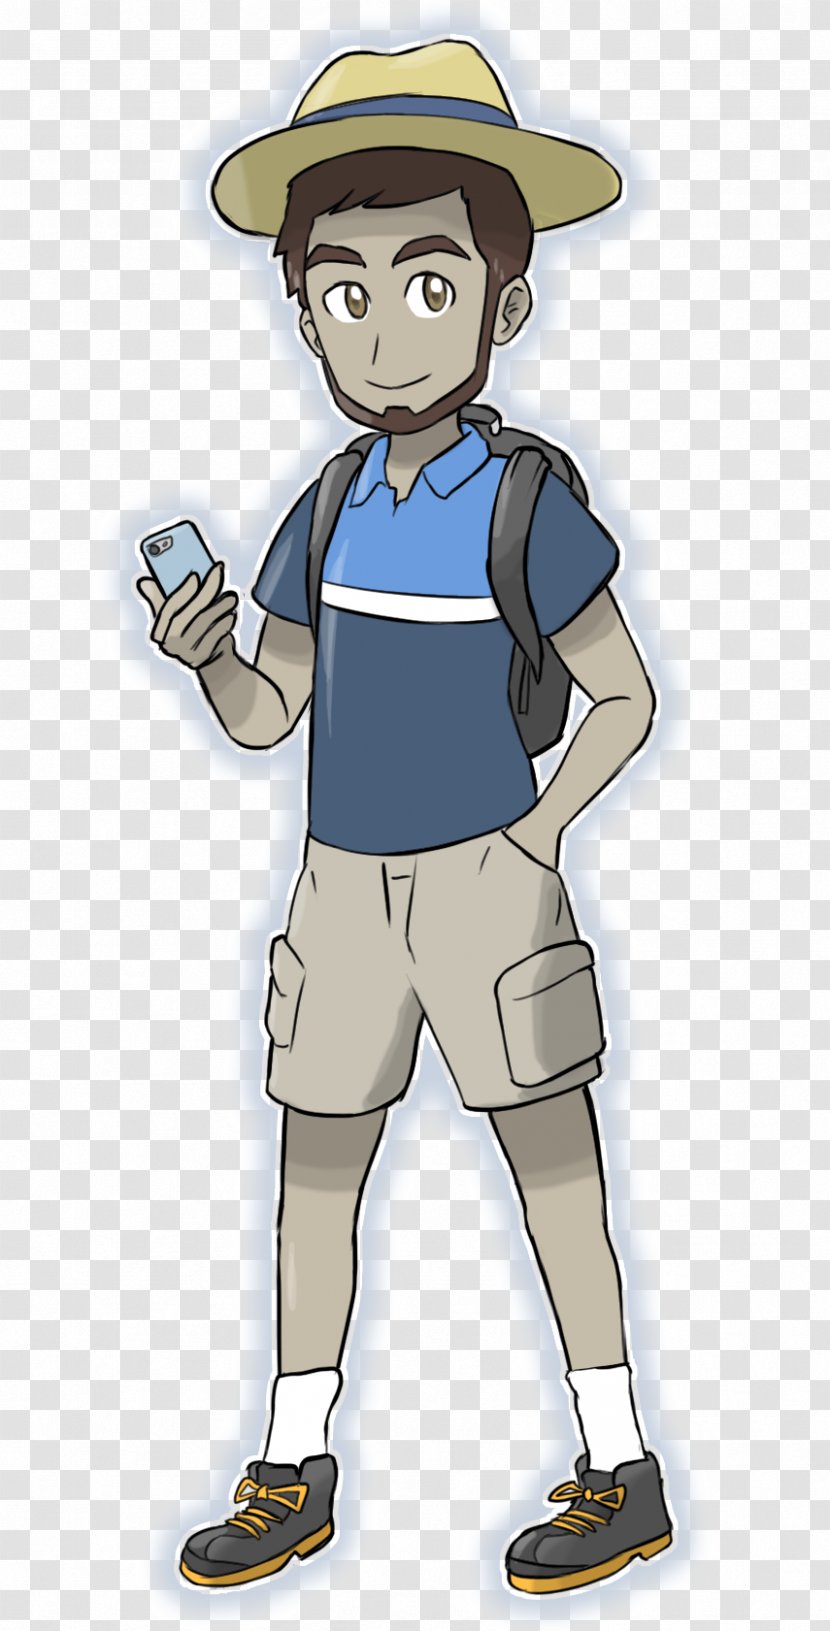 Pokémon GO Red And Blue Character Trainer - Boy - Pokemon Go Transparent PNG